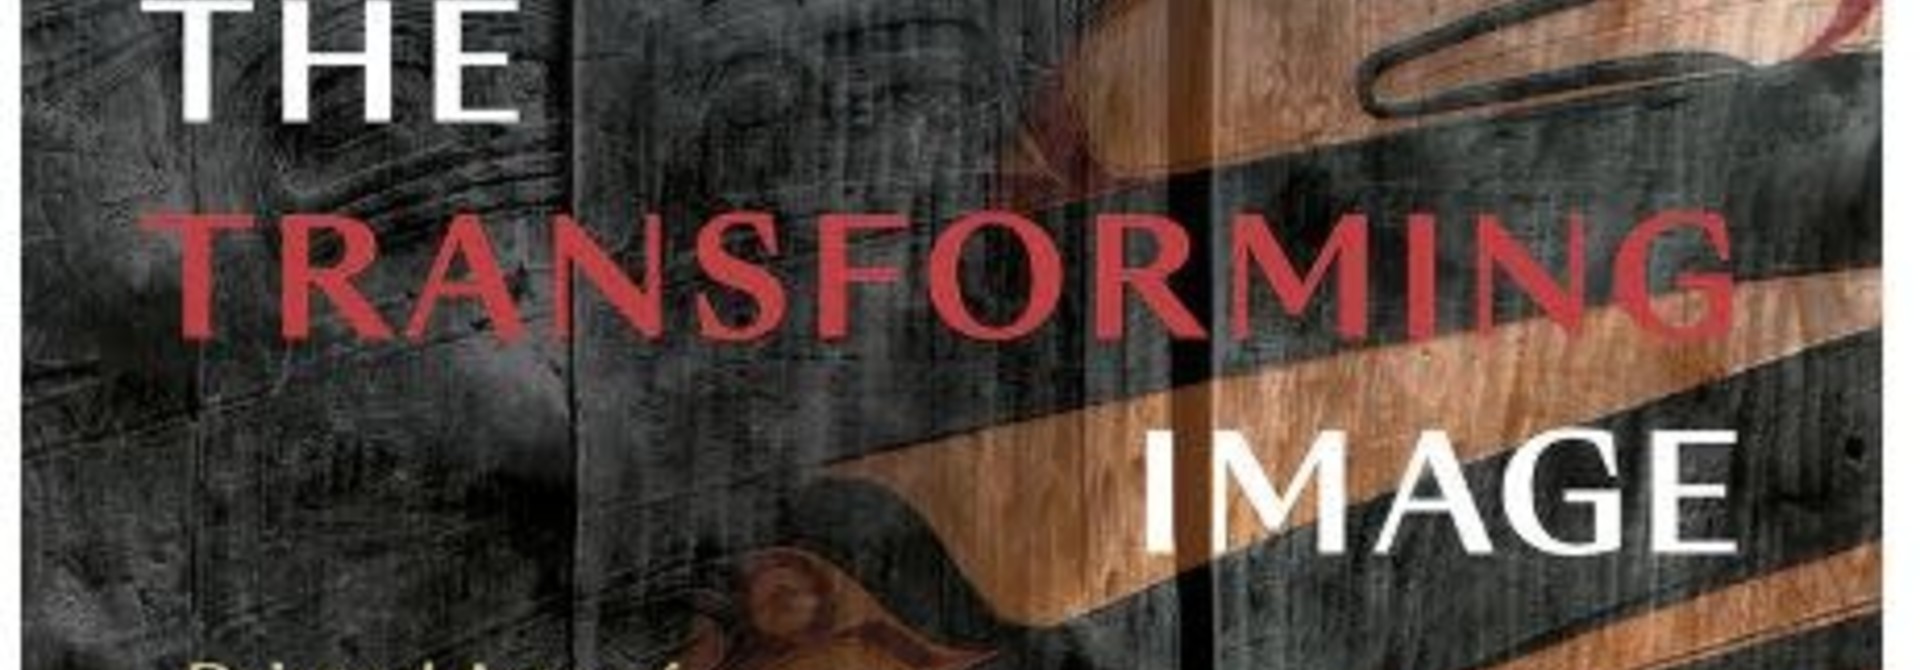 book- The Transforming Image